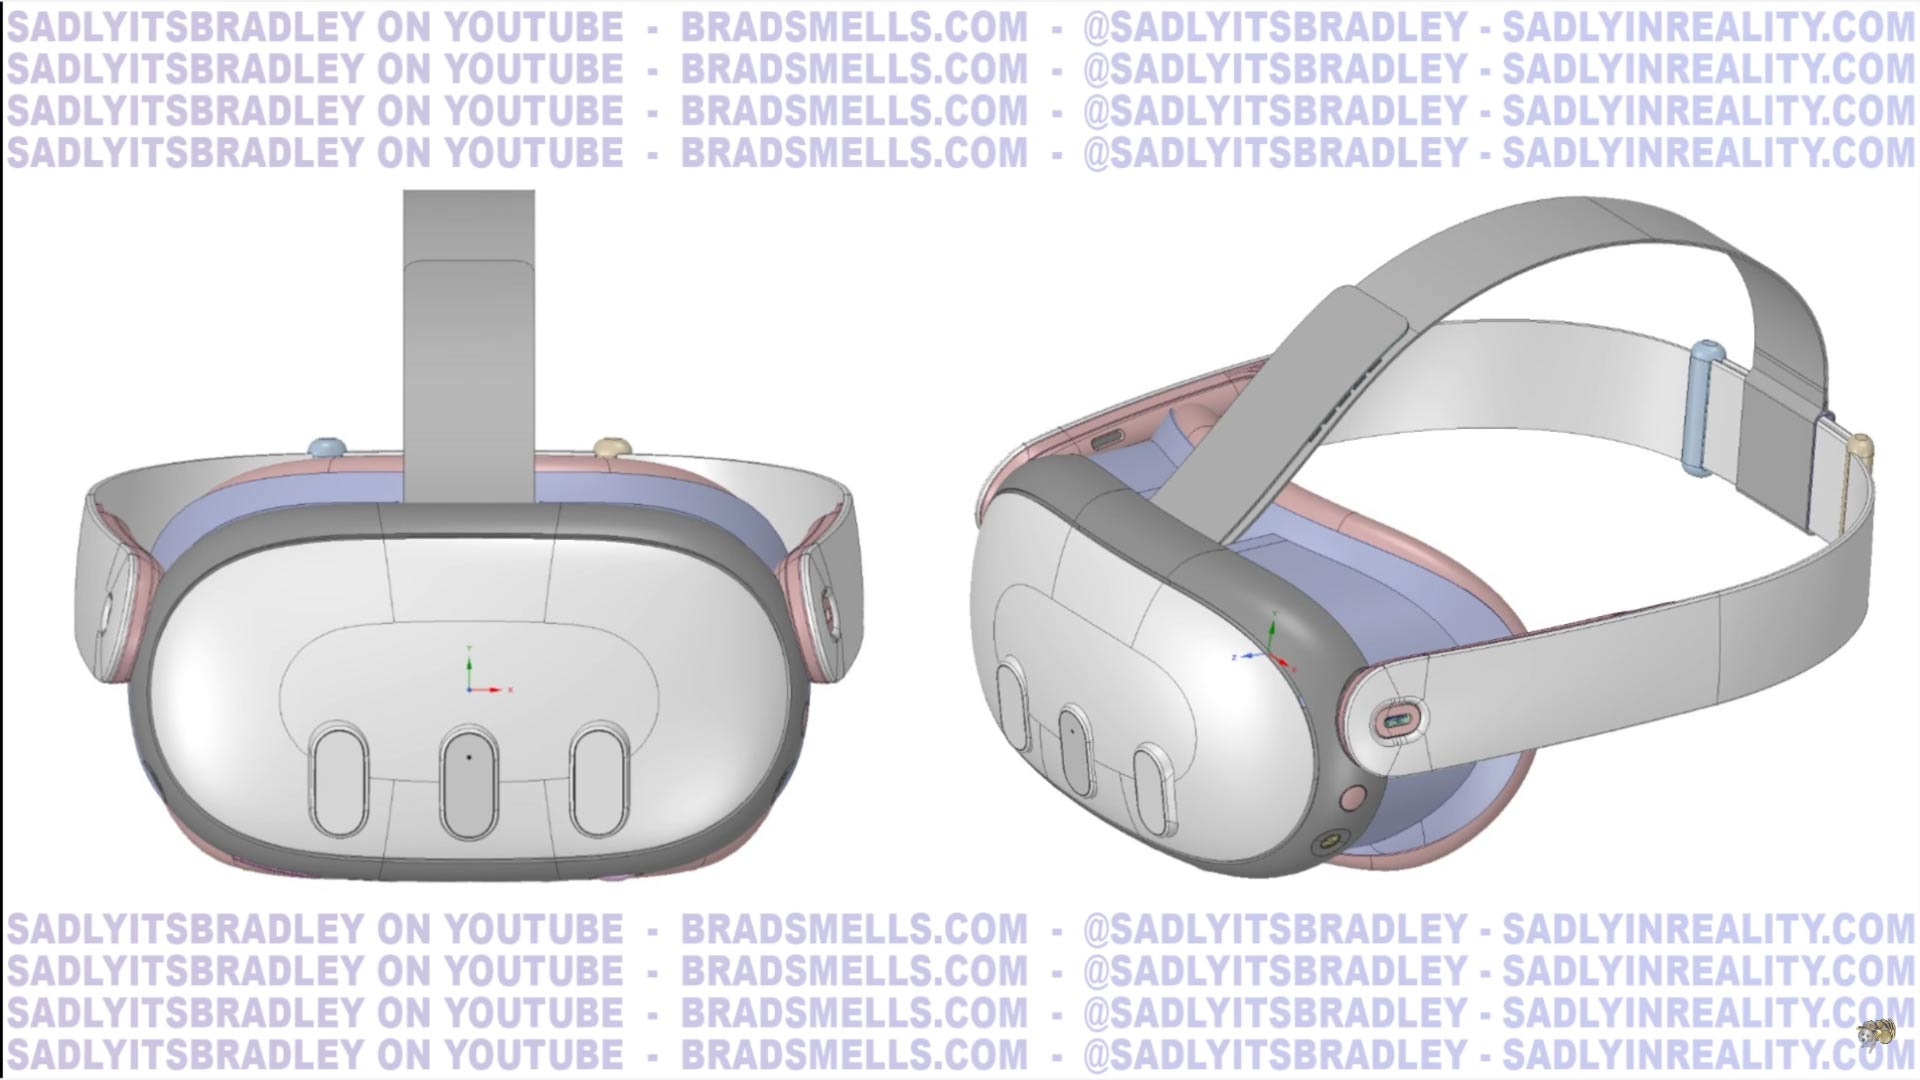 Apple VR headset to launch this spring and ship in the fall: report